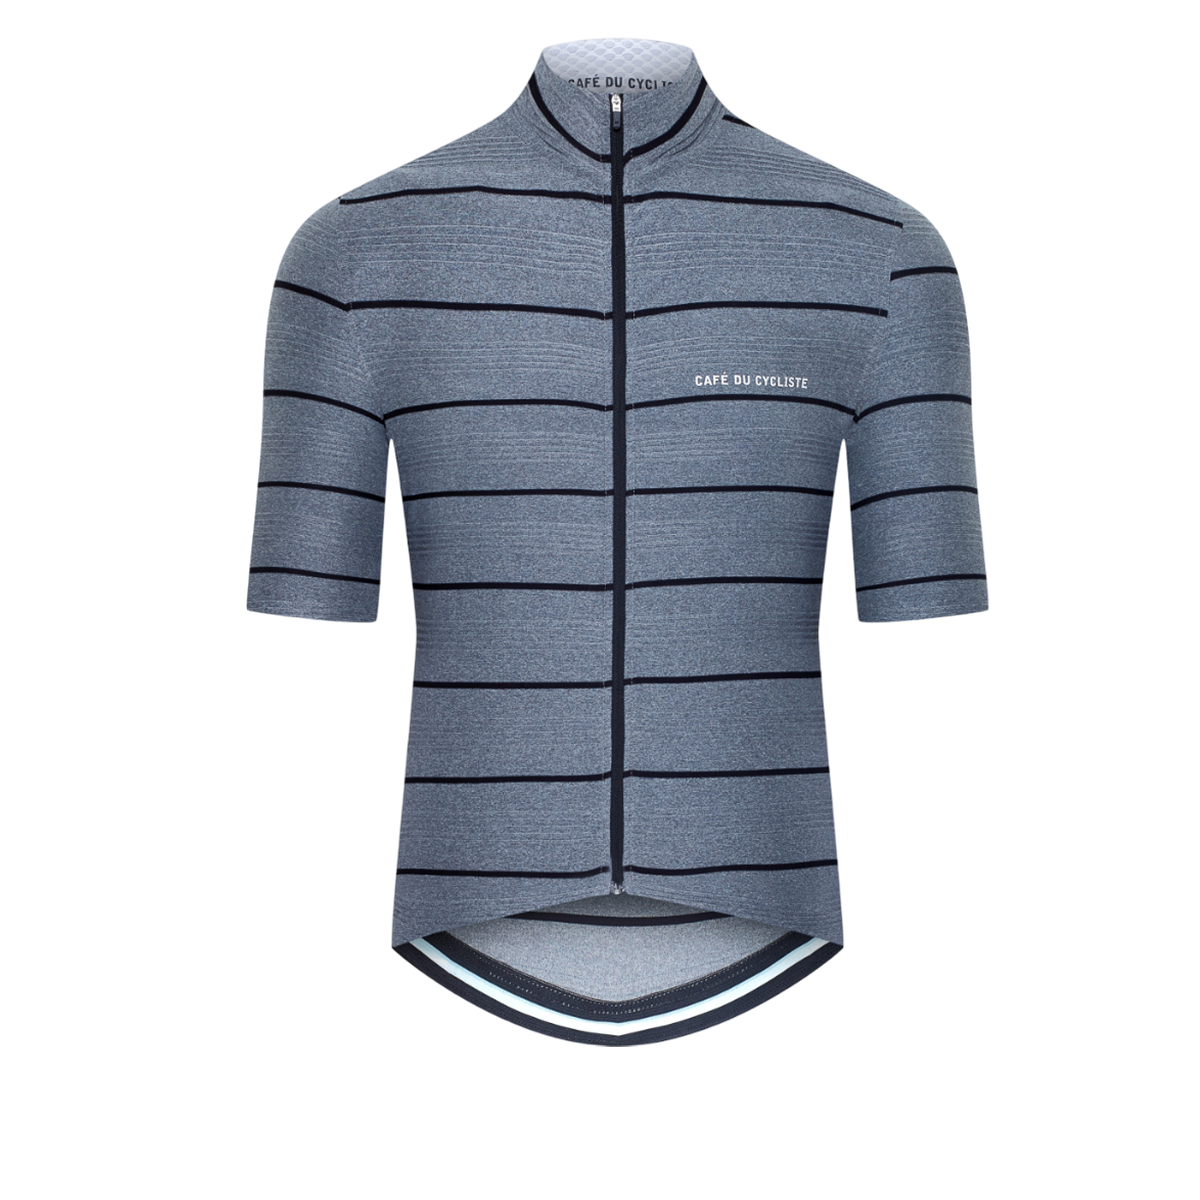 Francine - Men's Midweight Cycling Jersey - Heather Grey Double Stripe